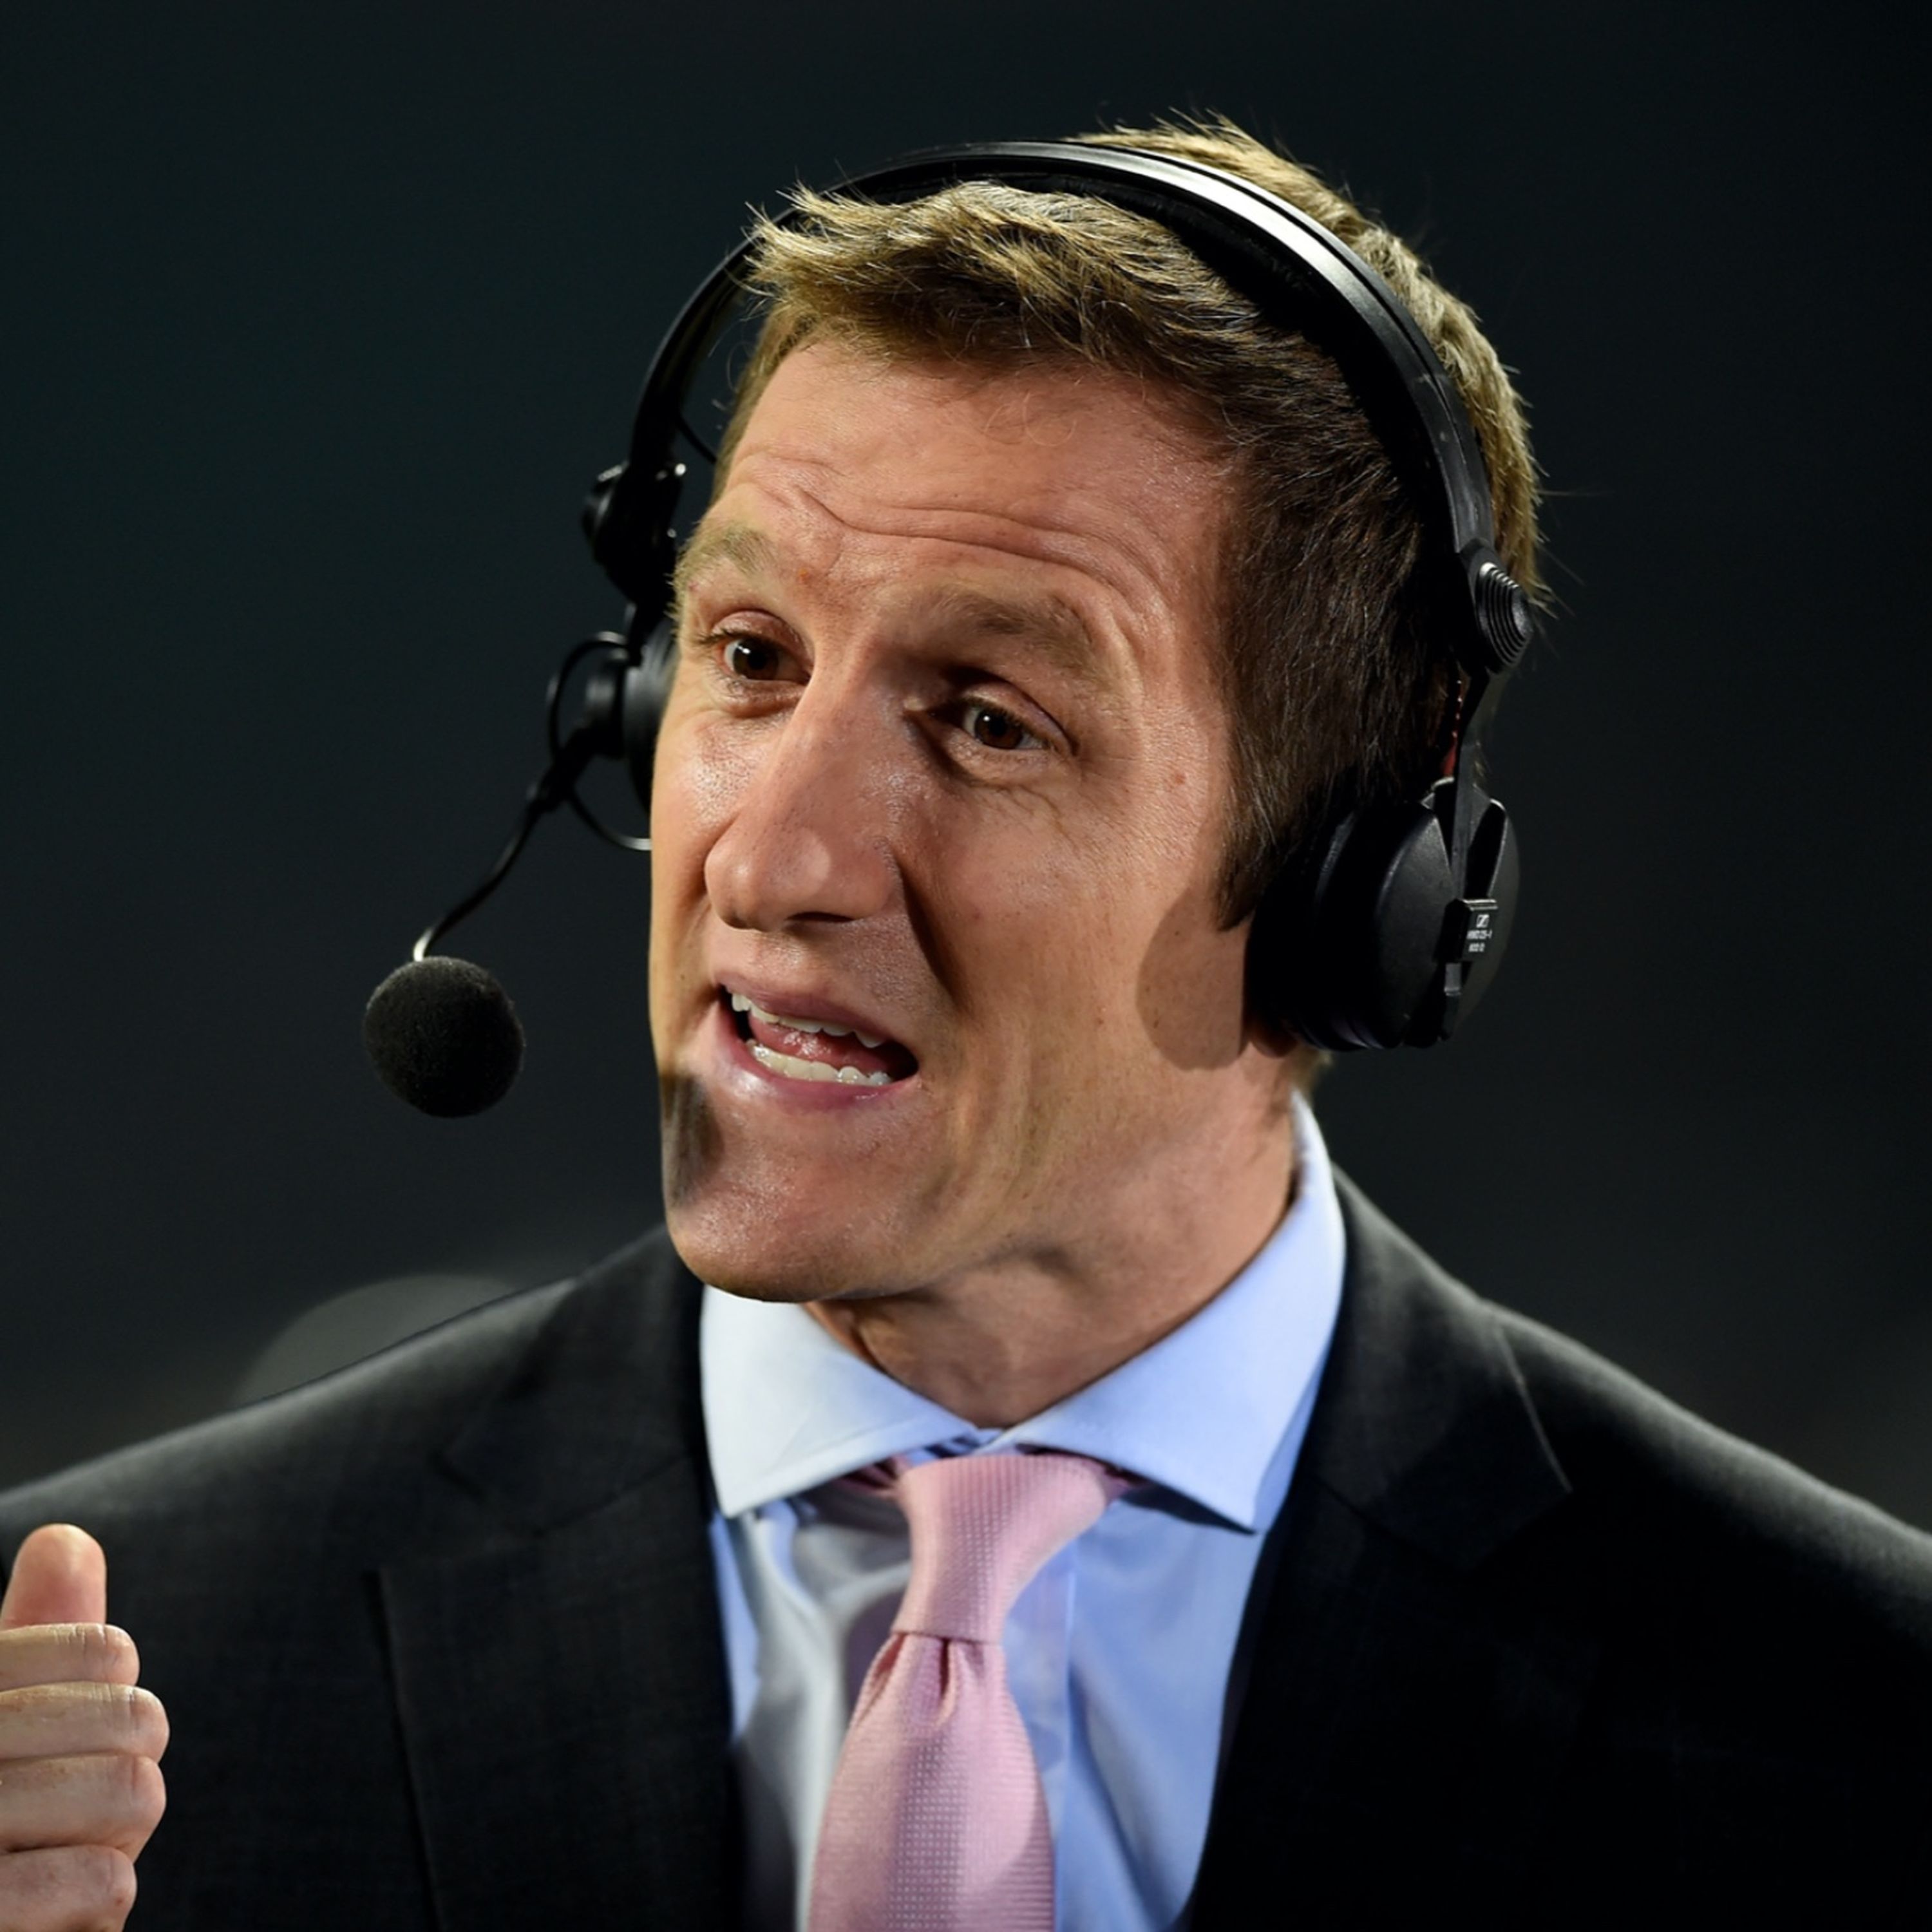 Full episode: England rugby and lockdown life with Will Greenwood